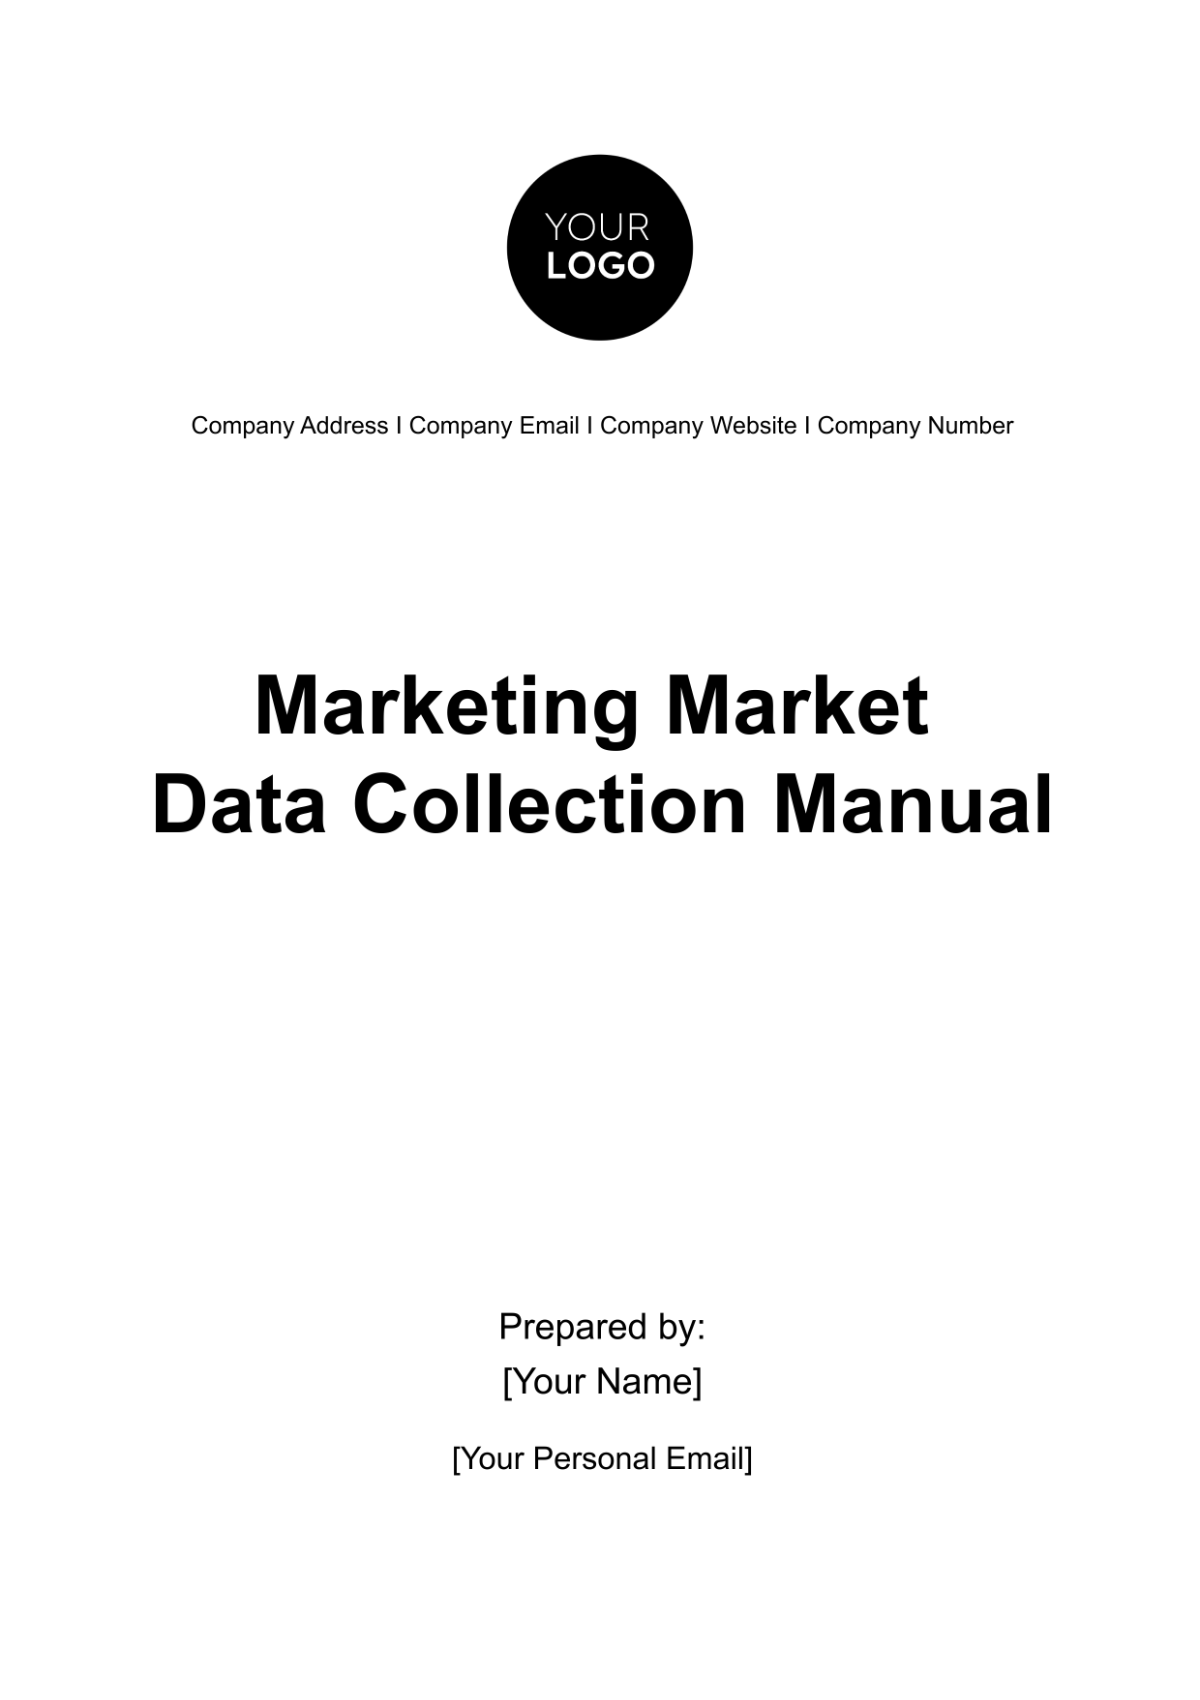 Marketing Market Data Collection Manual Template